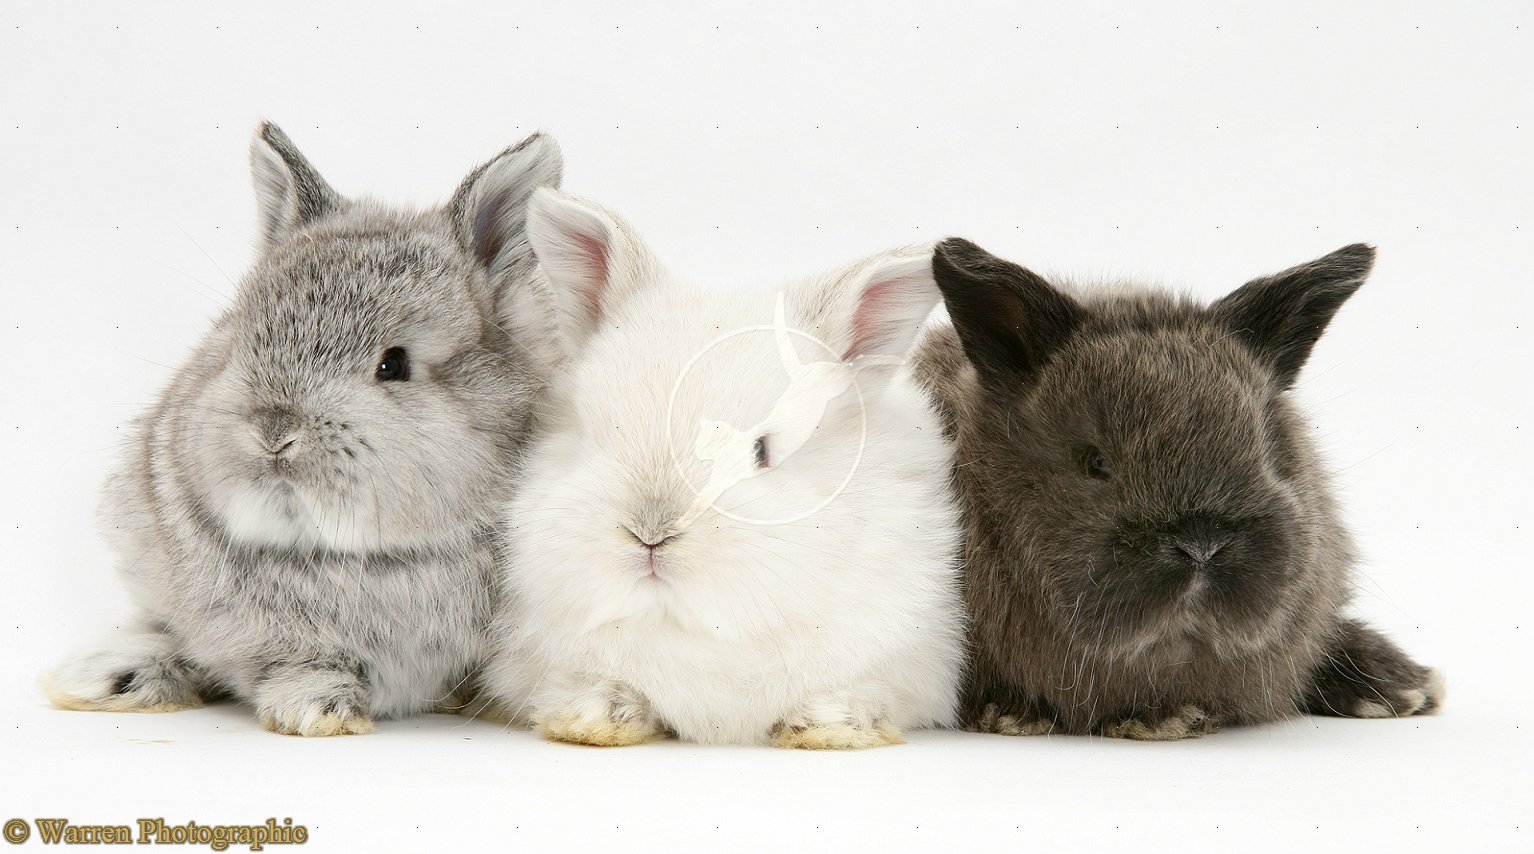 Cute Baby Bunnies 11070 Hd Wallpapers in Animals   Imagescicom